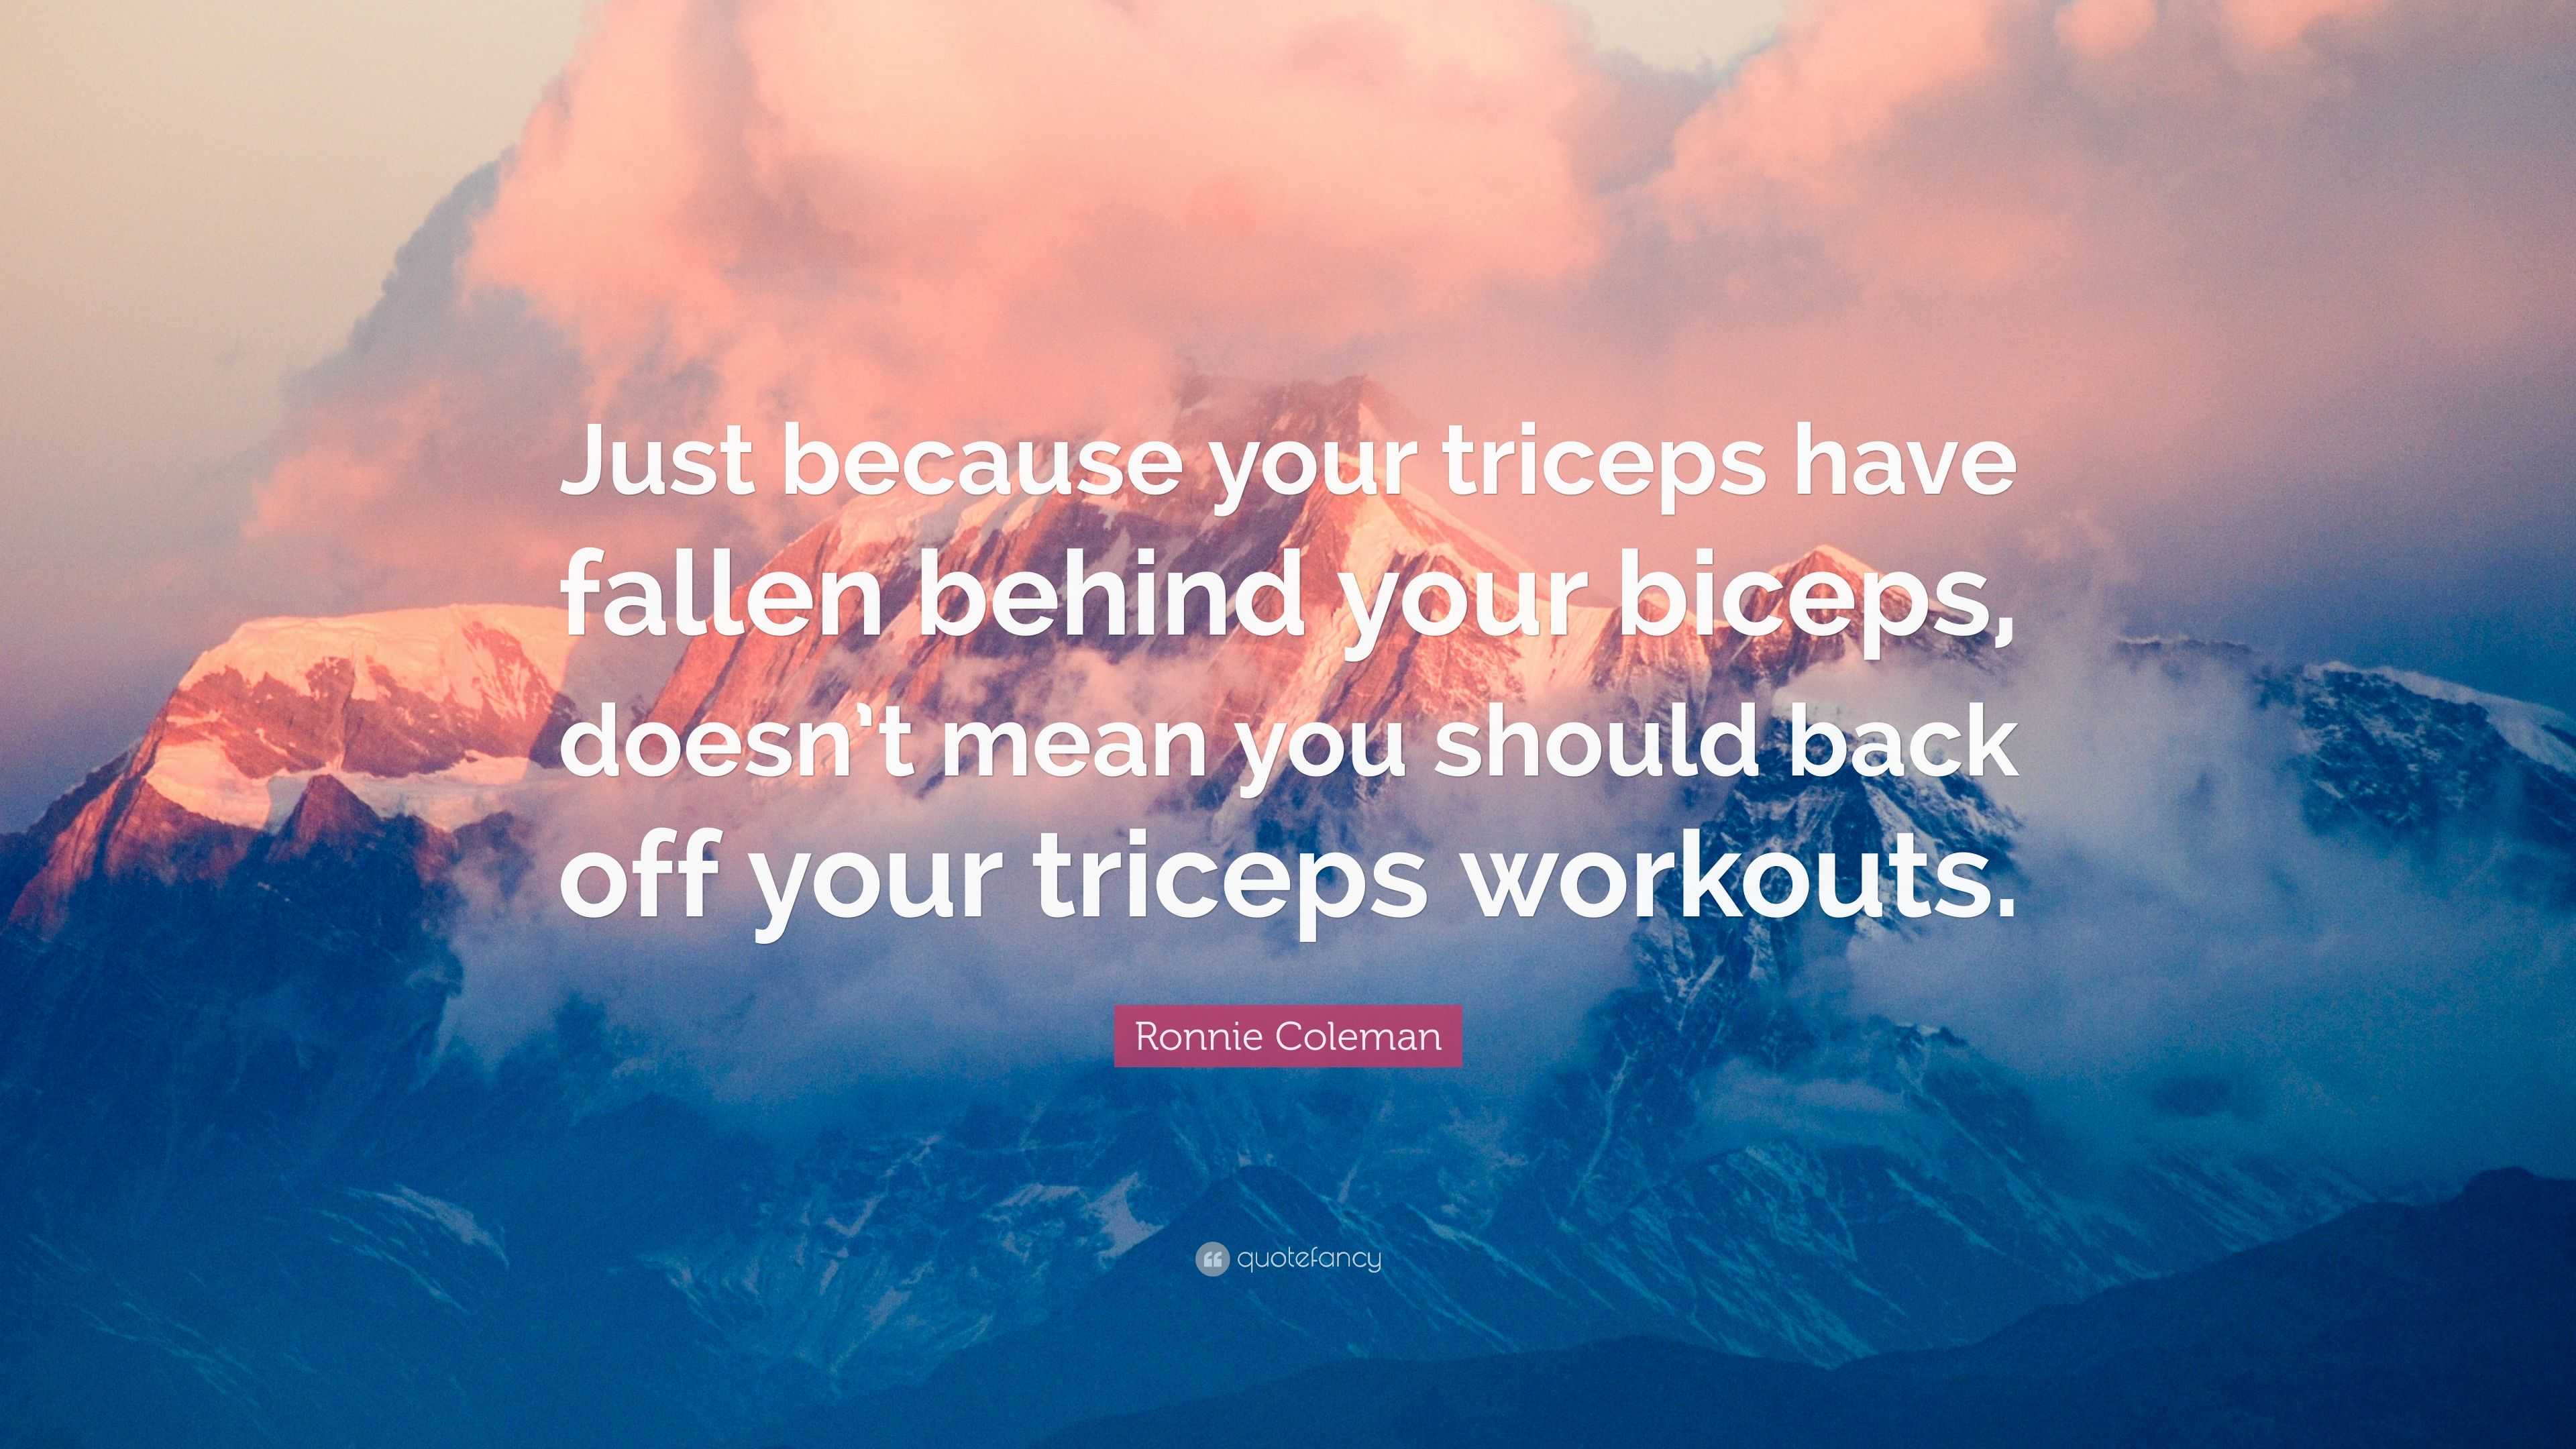 Ronnie Coleman Quote: “Just because your triceps have fallen behind your  biceps, doesn't mean you